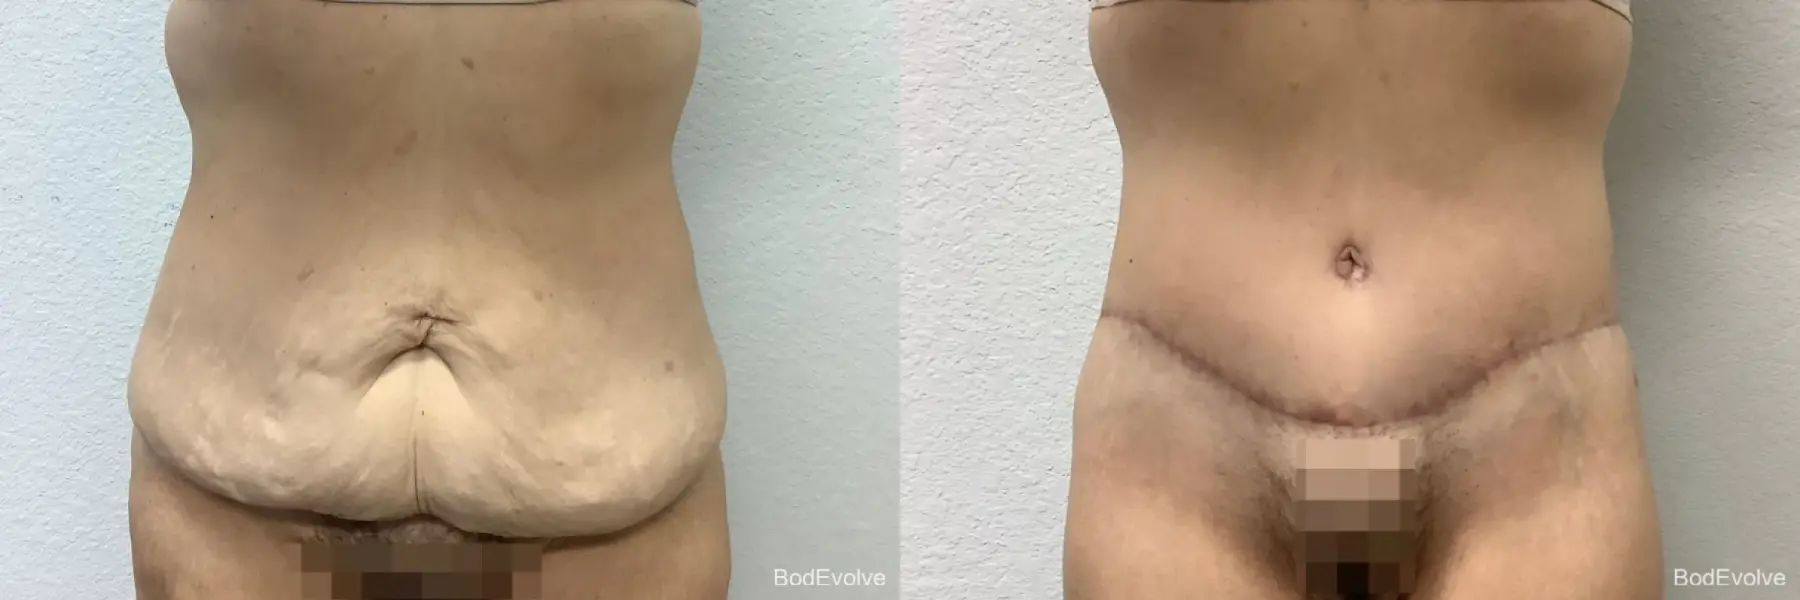 Body Lift: Patient 2 - Before and After 1